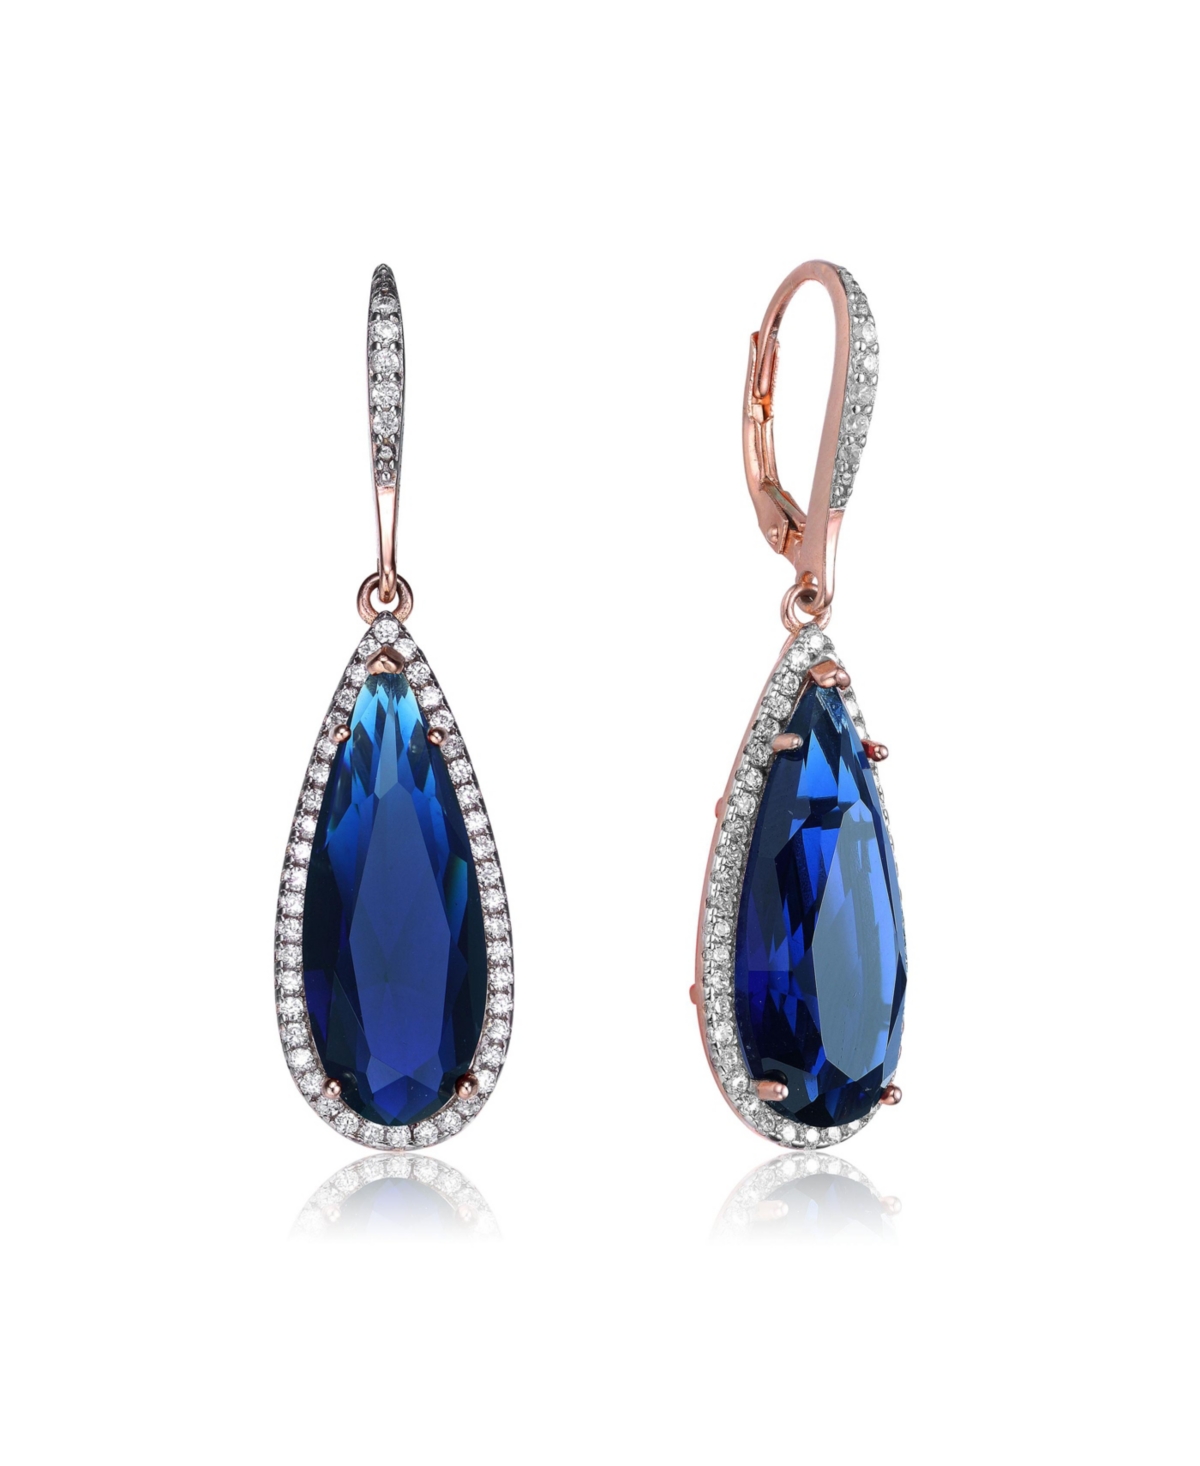 Elegant Teardrop Shaped Earrings with A Cubic Zirconia Middle Stone - Red